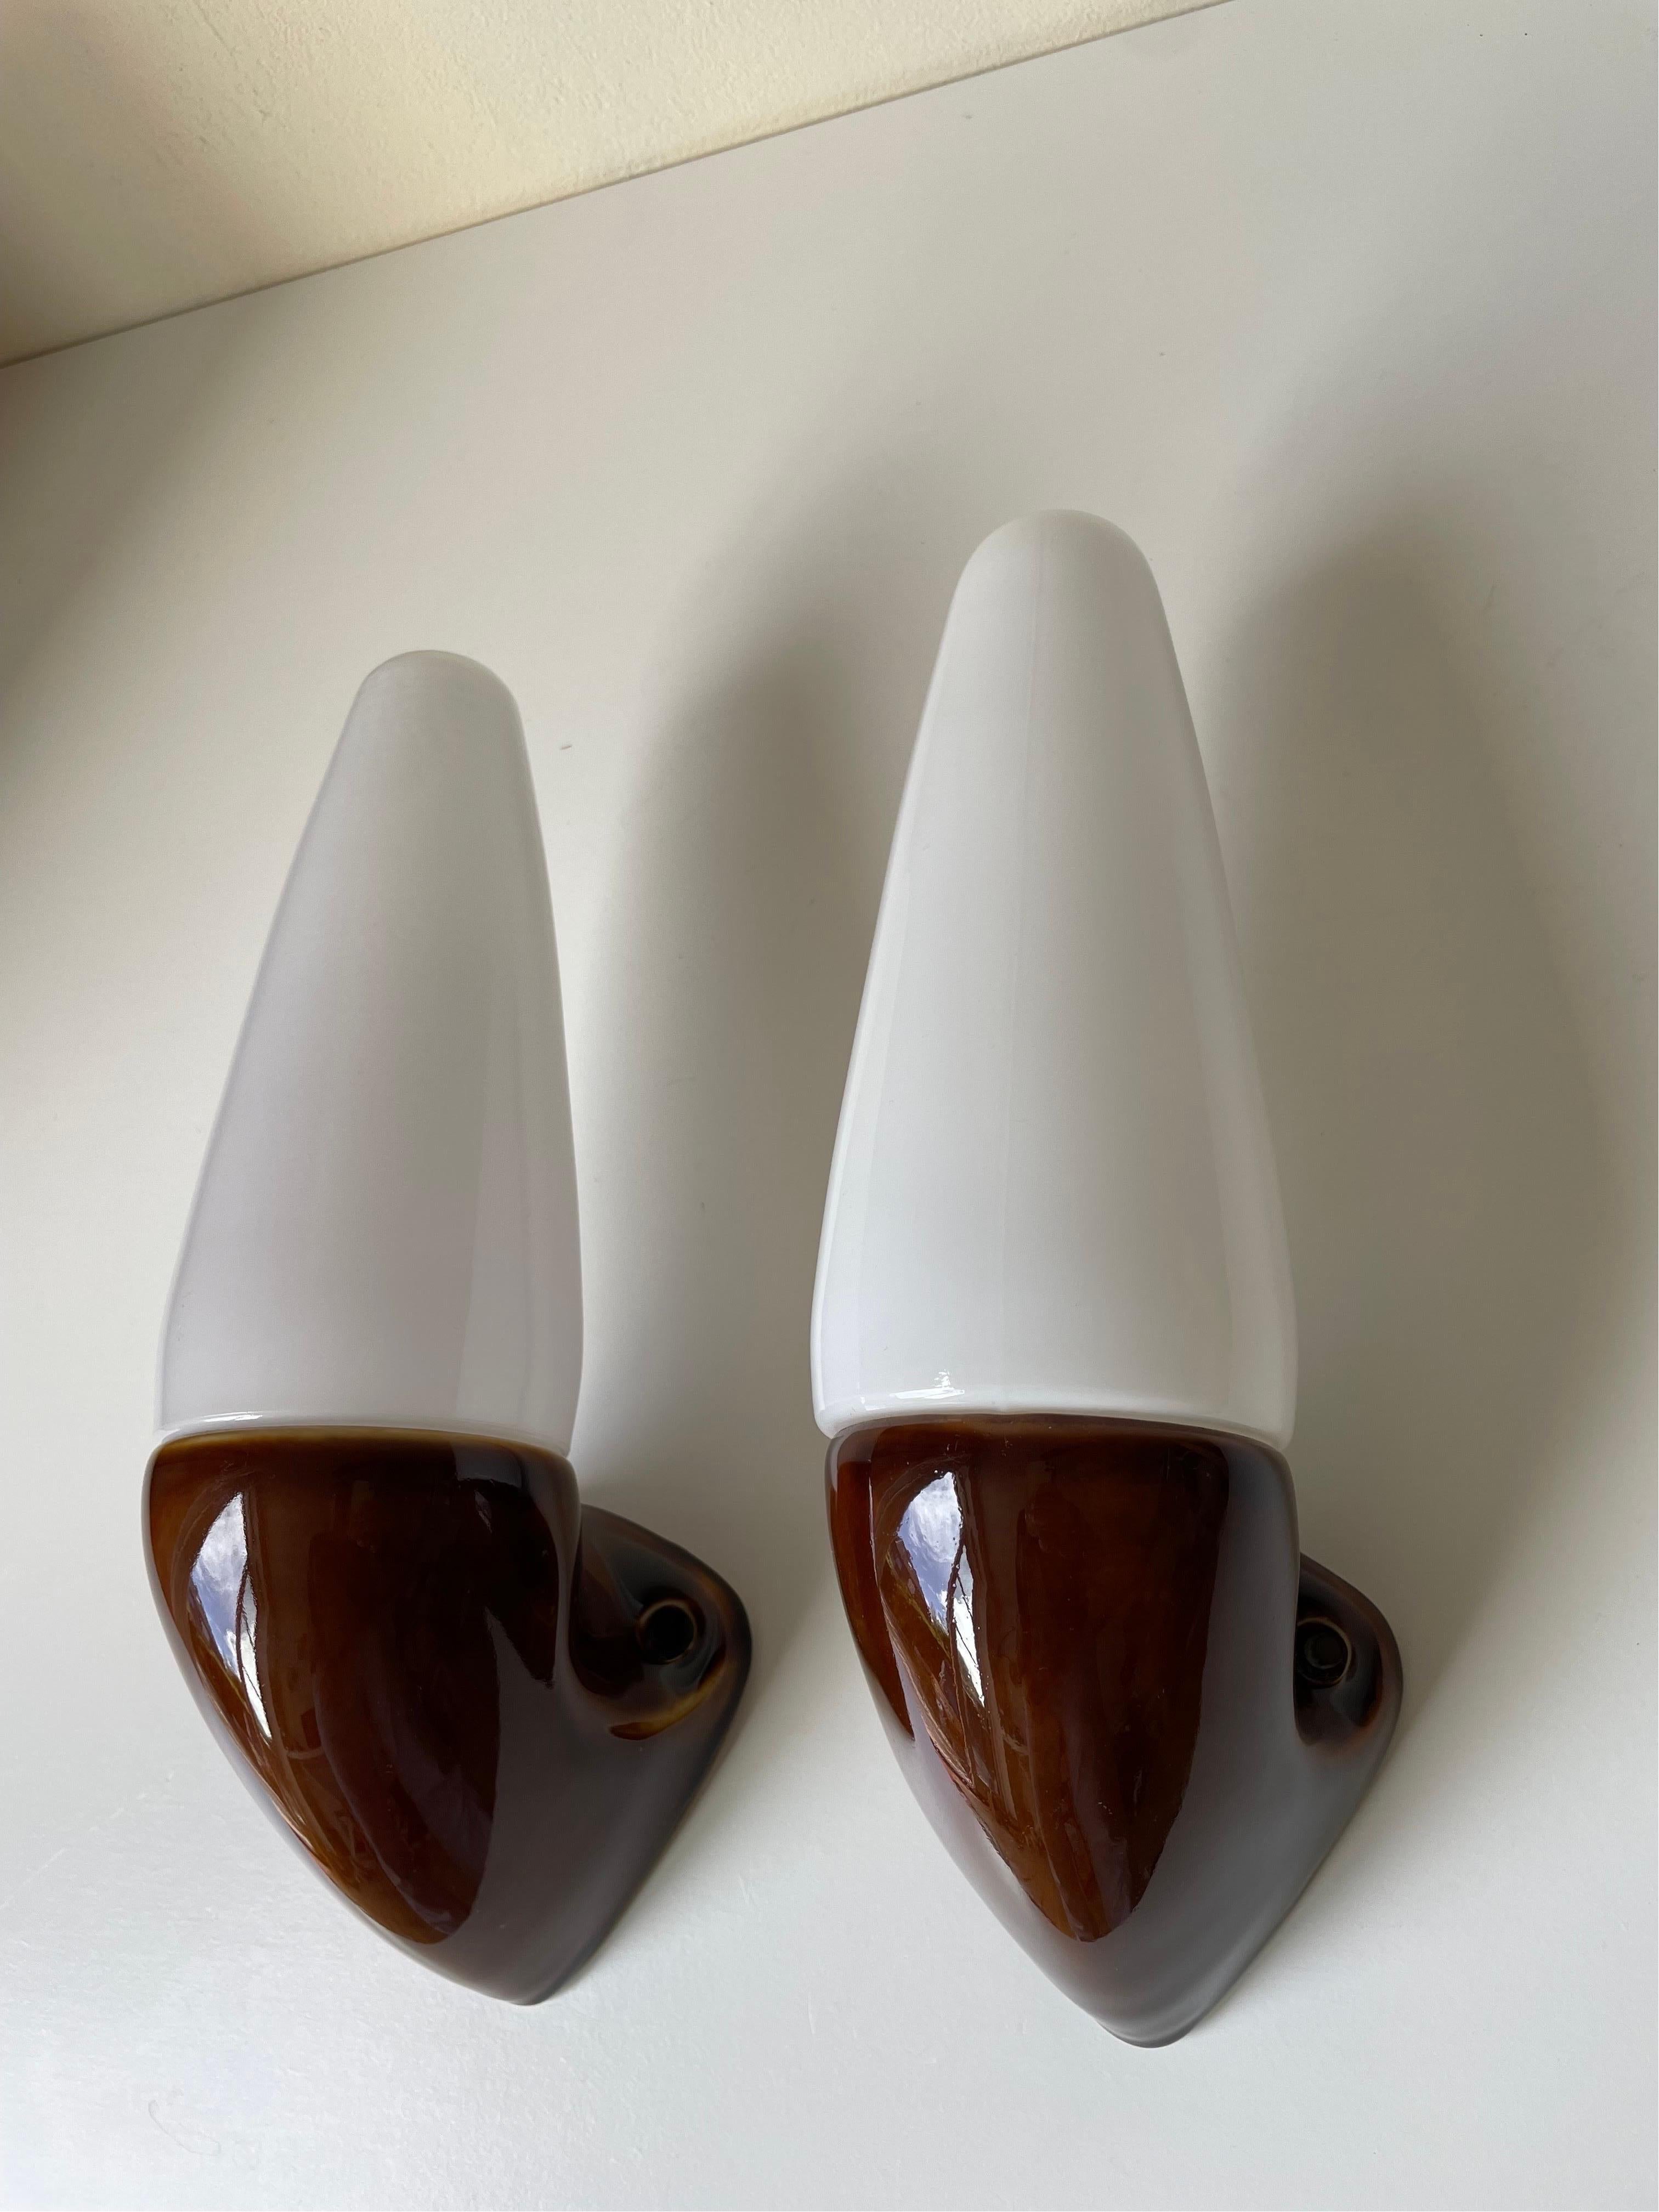 Set of two Swedish midcentury modern vintage wall sconces designed by artistic director for Ifö, Stig Carlsson (1932-2008) in the early 1960s. Shiny ochre brown glazed mount with cone shaped white opaline glass top. Original porcelain fitting for